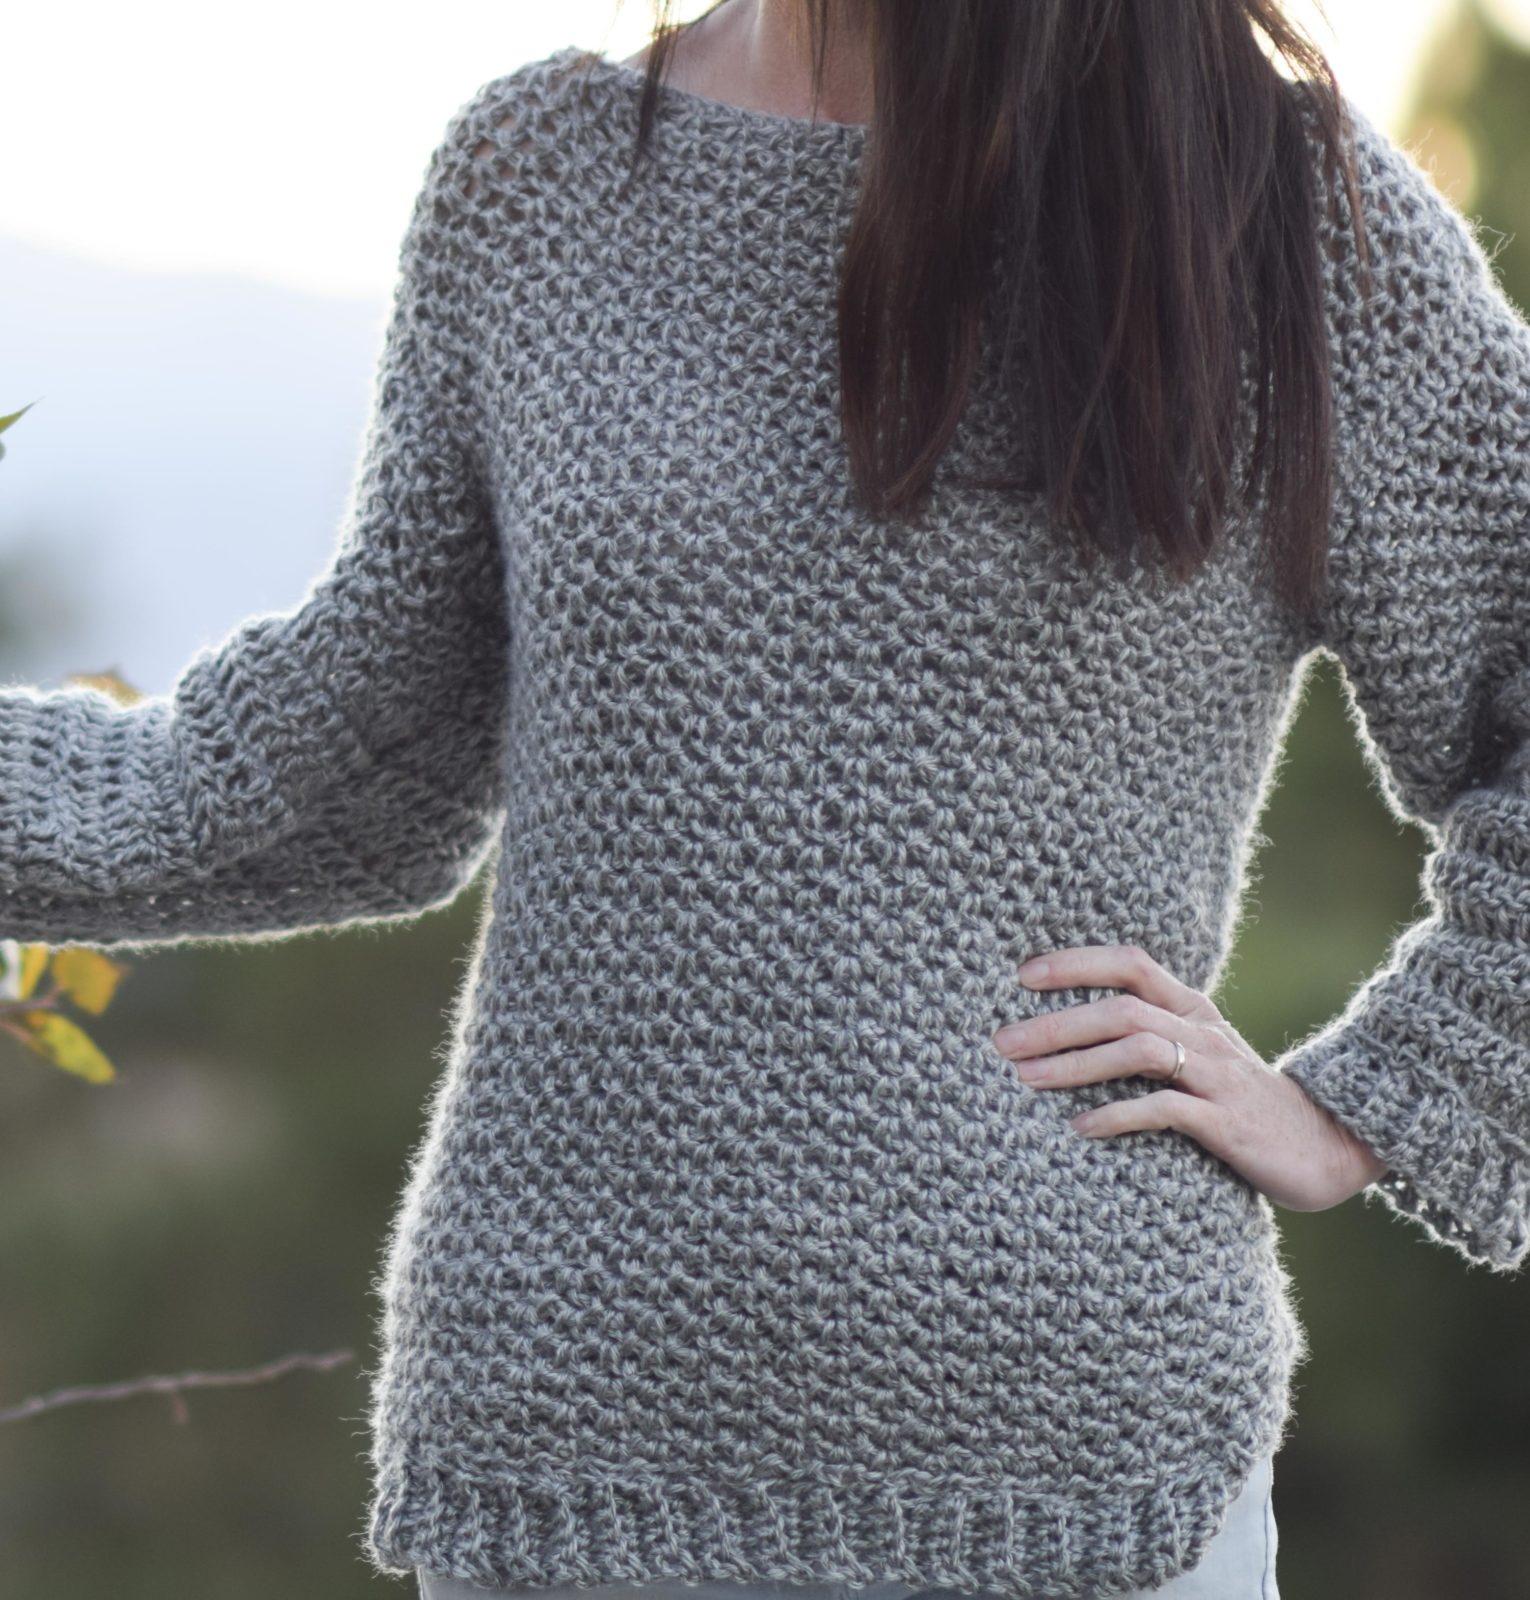 Knit Sweaters Patterns How To Make An Easy Crocheted Sweater Knit Like Mama In A Stitch